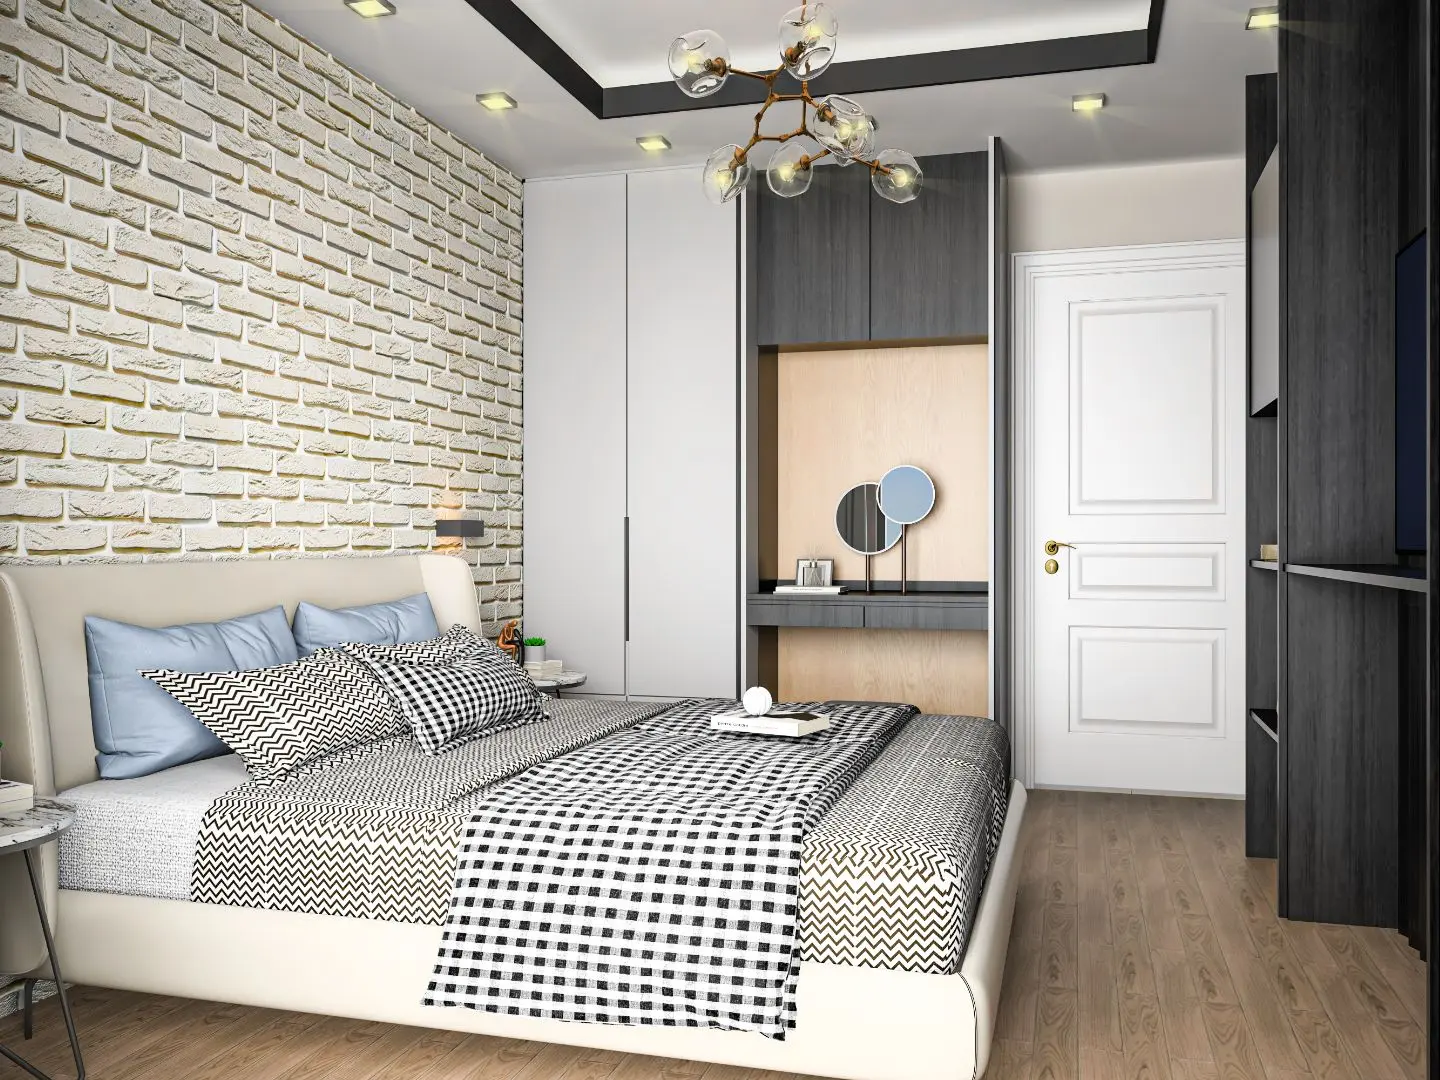 NEW PROJECT IN ALANYA HASBAHÇE